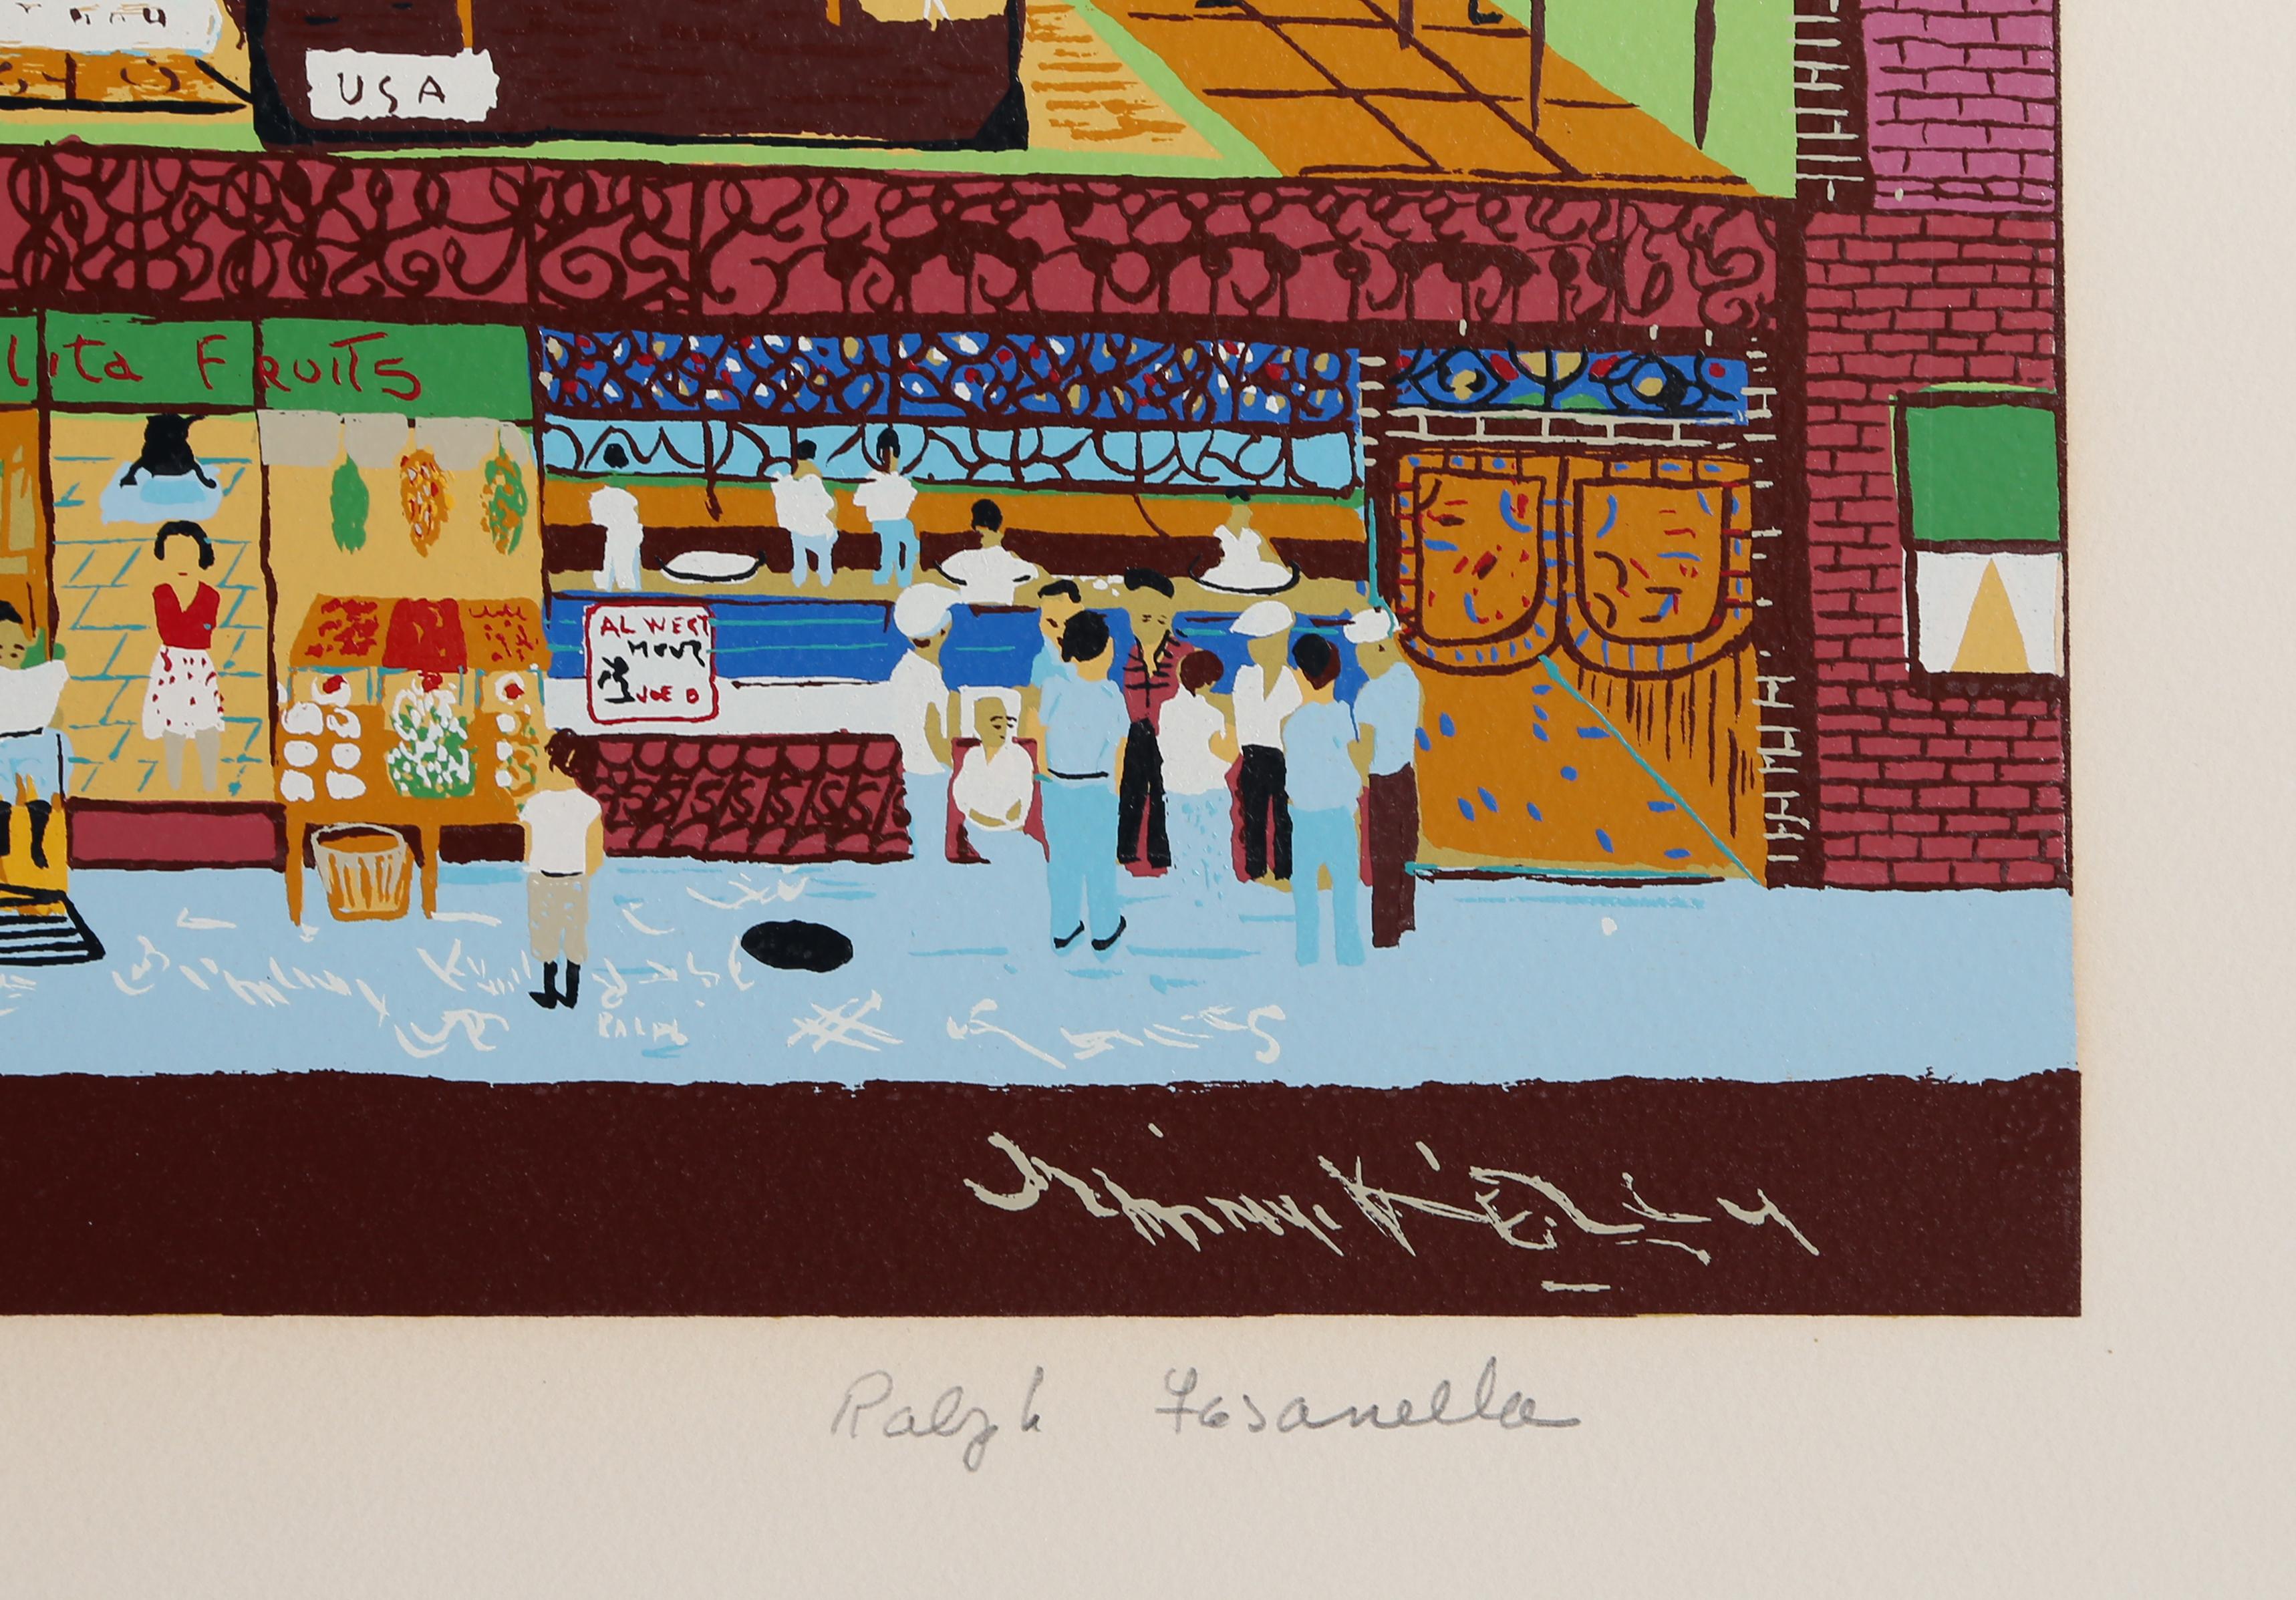 Artist: Ralph Fasanella, American (1914 - 1997)
Title: Family Supper
Year: 1974
Medium: Screenprint on Arches Paper, signed in pencil
Edition: 250, AP 25
Size: 41 in. x 31 in. (104.14 cm x 78.74 cm)